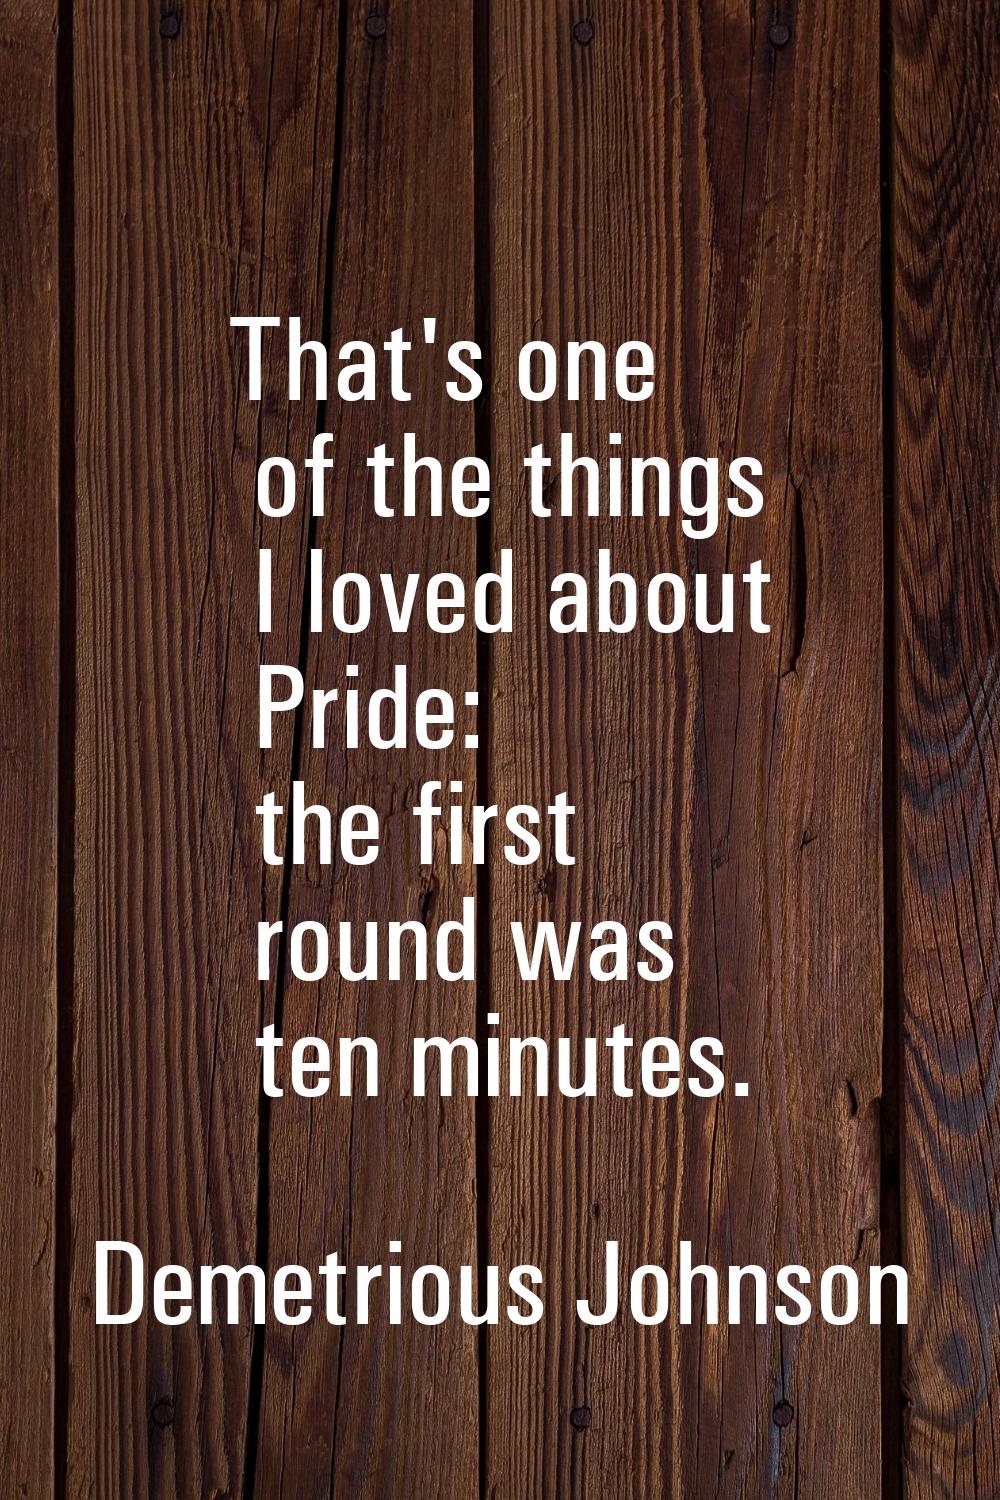 That's one of the things I loved about Pride: the first round was ten minutes.